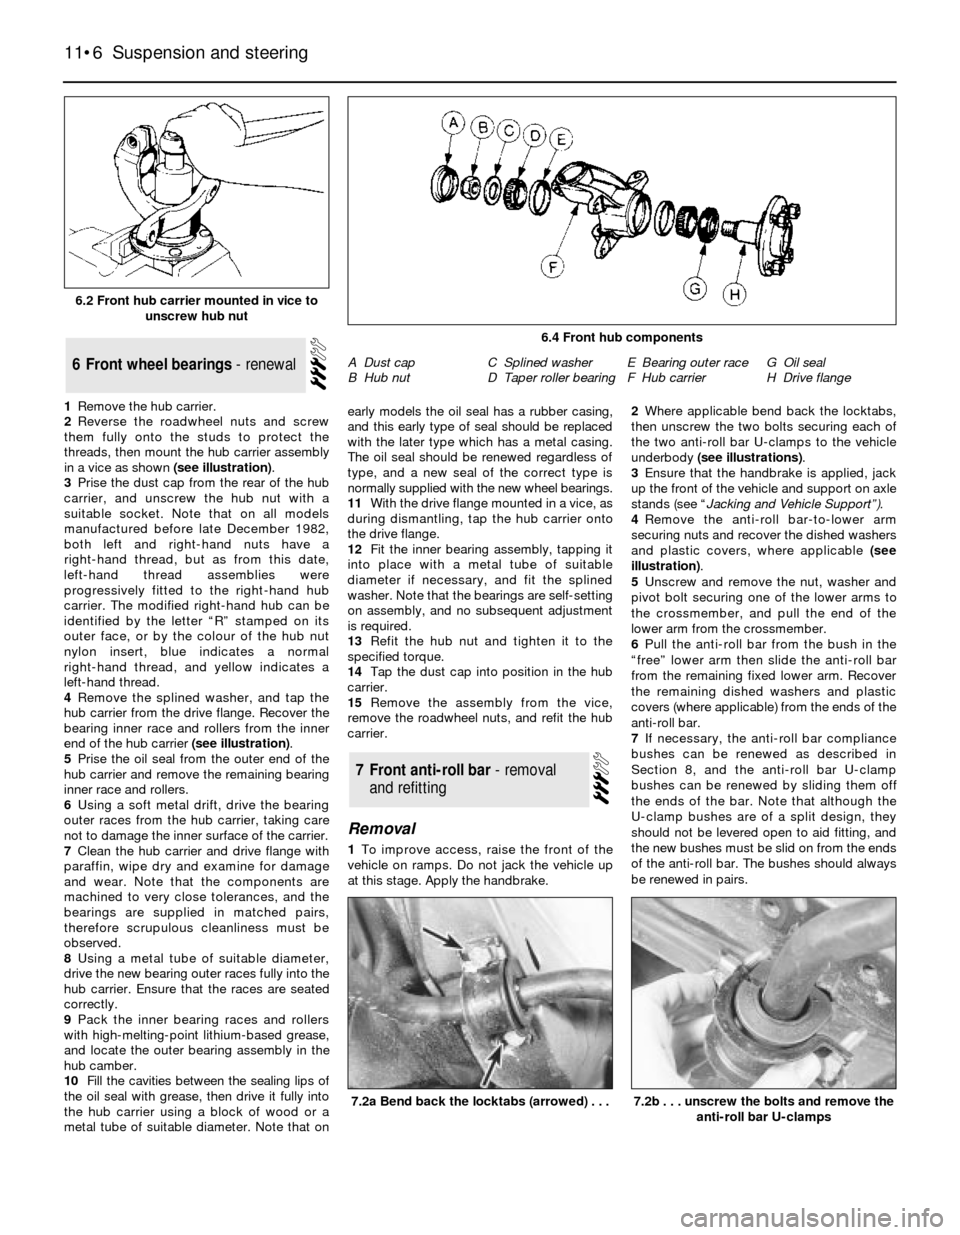 FORD SIERRA 1987 2.G Suspension And Steering Workshop Manual 1Remove the hub carrier.
2Reverse the roadwheel nuts and screw
them fully onto the studs to protect the
threads, then mount the hub carrier assembly
in a vice as shown (see illustration).
3Prise the d